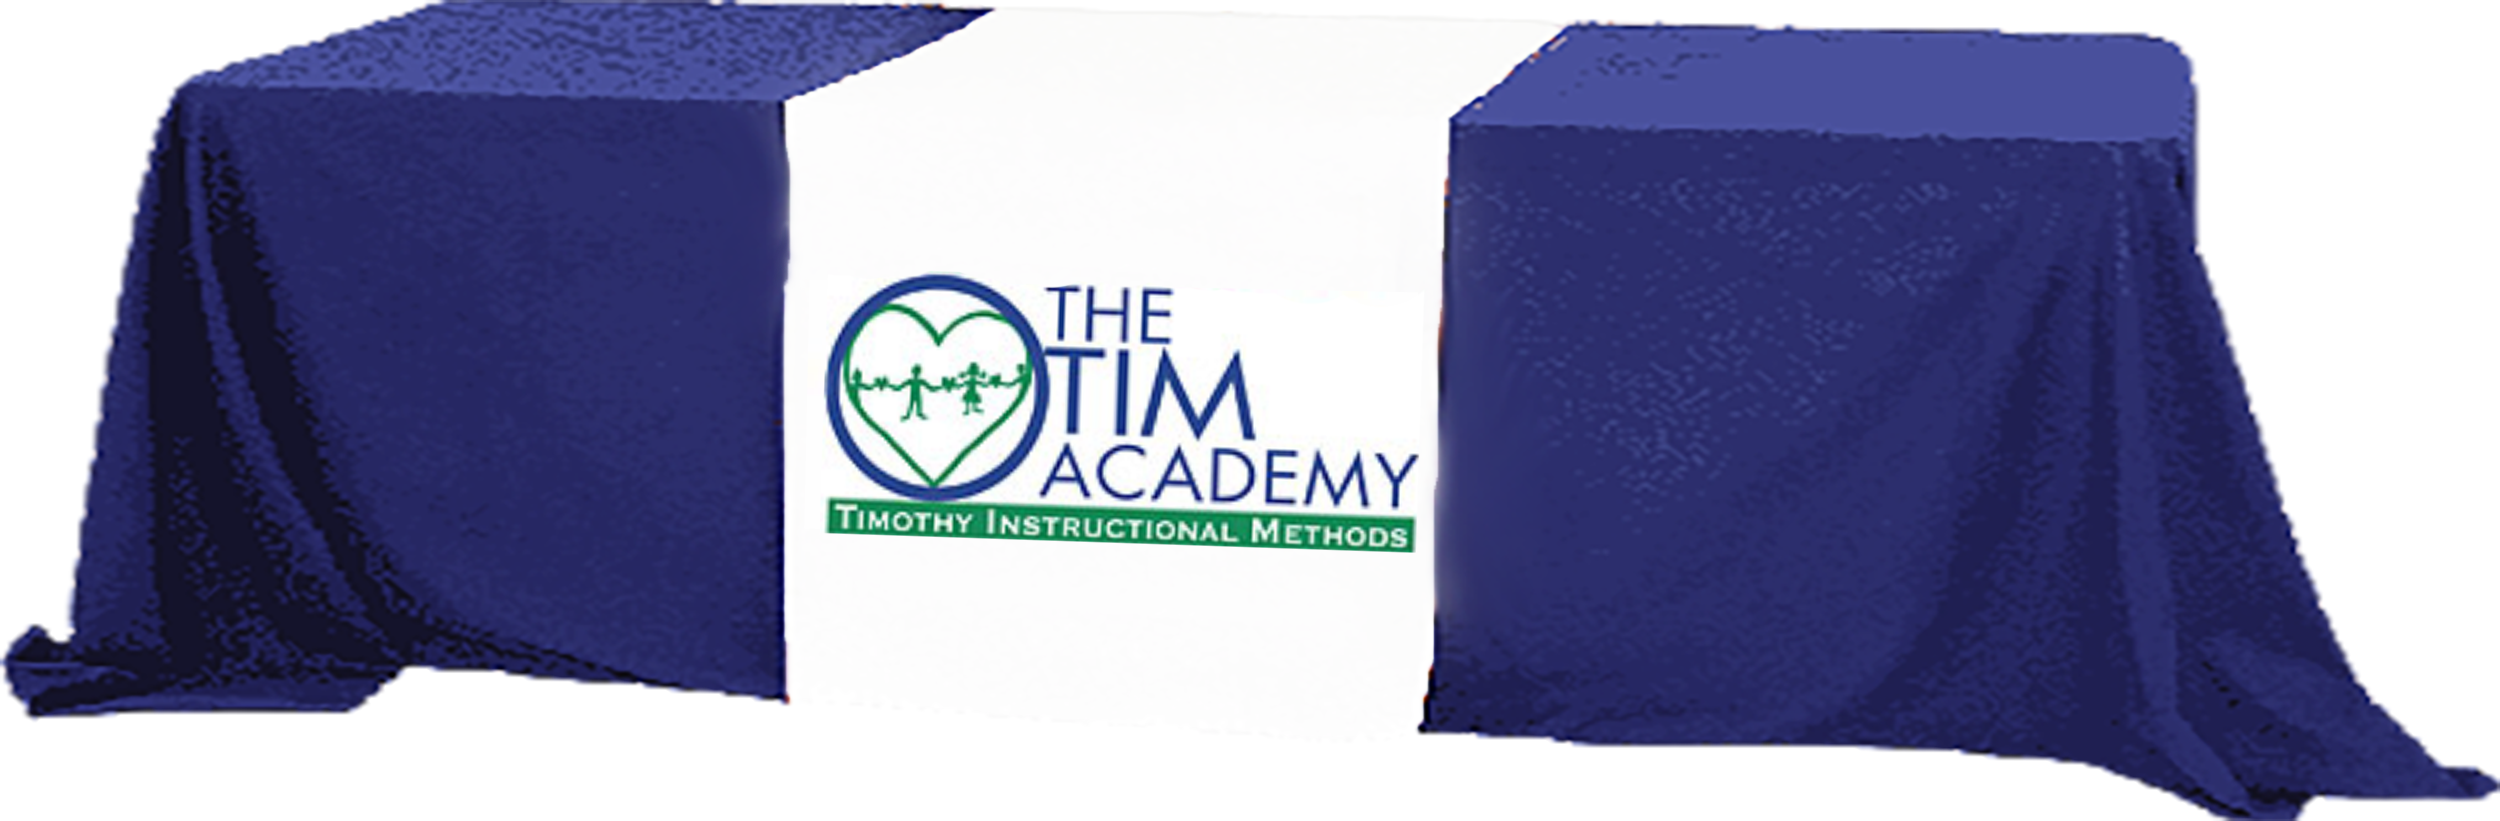 TIM Academy logo on a table cover over a table image